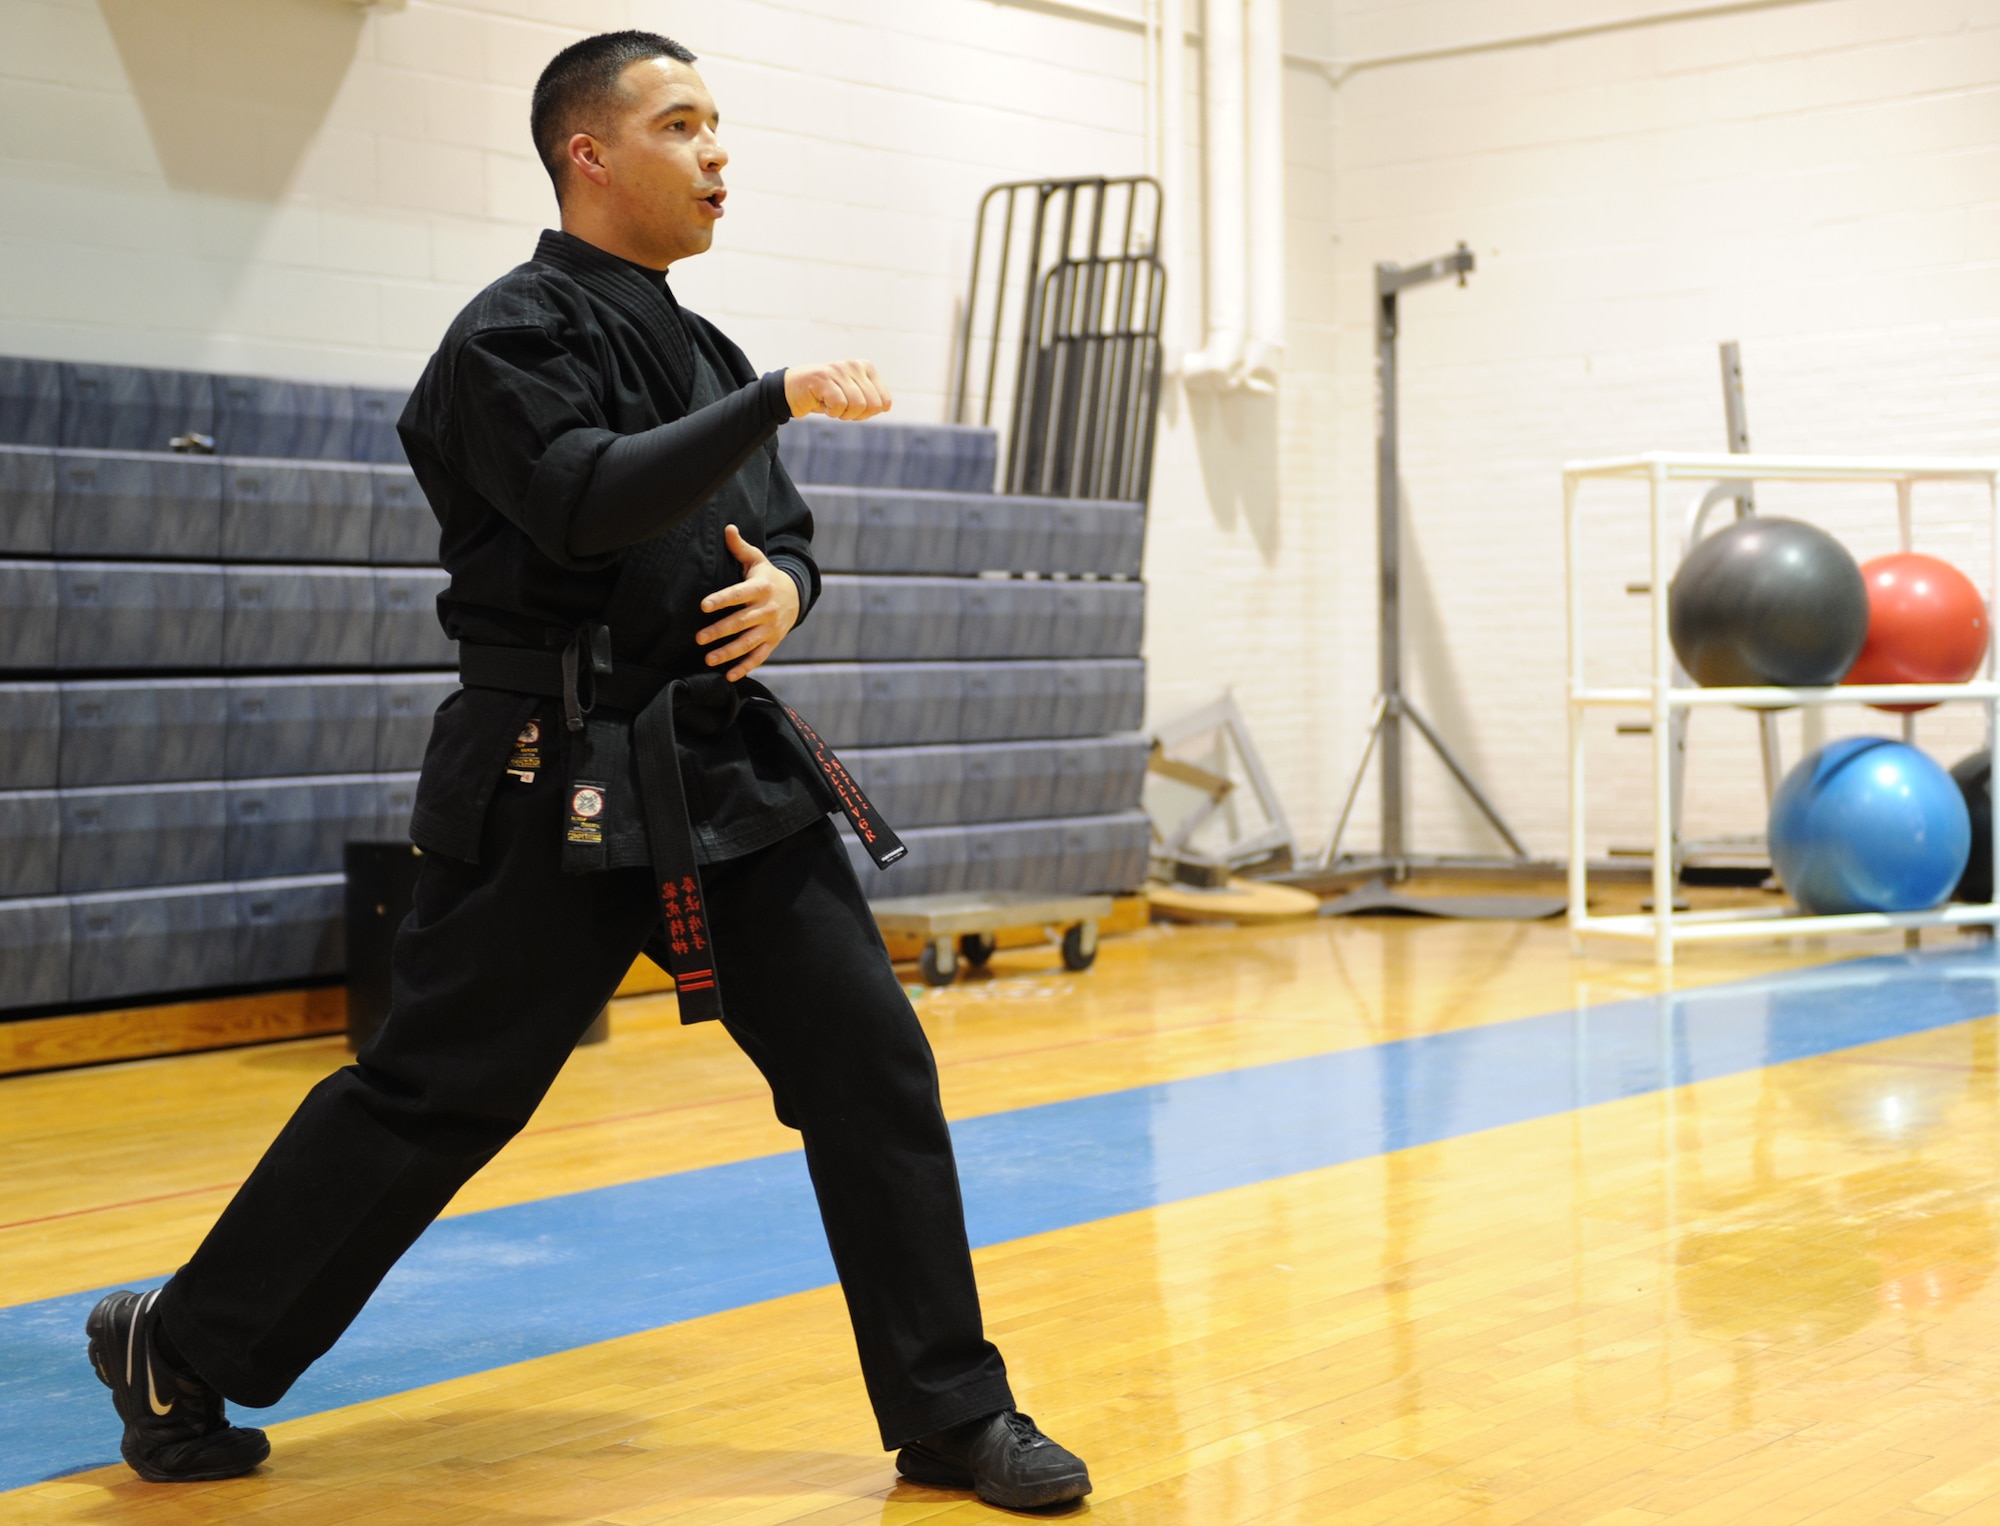 WHITEMAN AIR FORCE BASE, Mo. – Sensei Larry Tolliver, Kenpo Instructor, shows his class a soft bow stance Feb. 2. Kenpo is a Japanese term that translates to mean “Law of the Fist.” Classes are Mondays and Wednesdays from 5 – 6 p.m. at the fitness center for $8 a class. (U.S. Air Force photo/Senior Airman Stephen Linch)